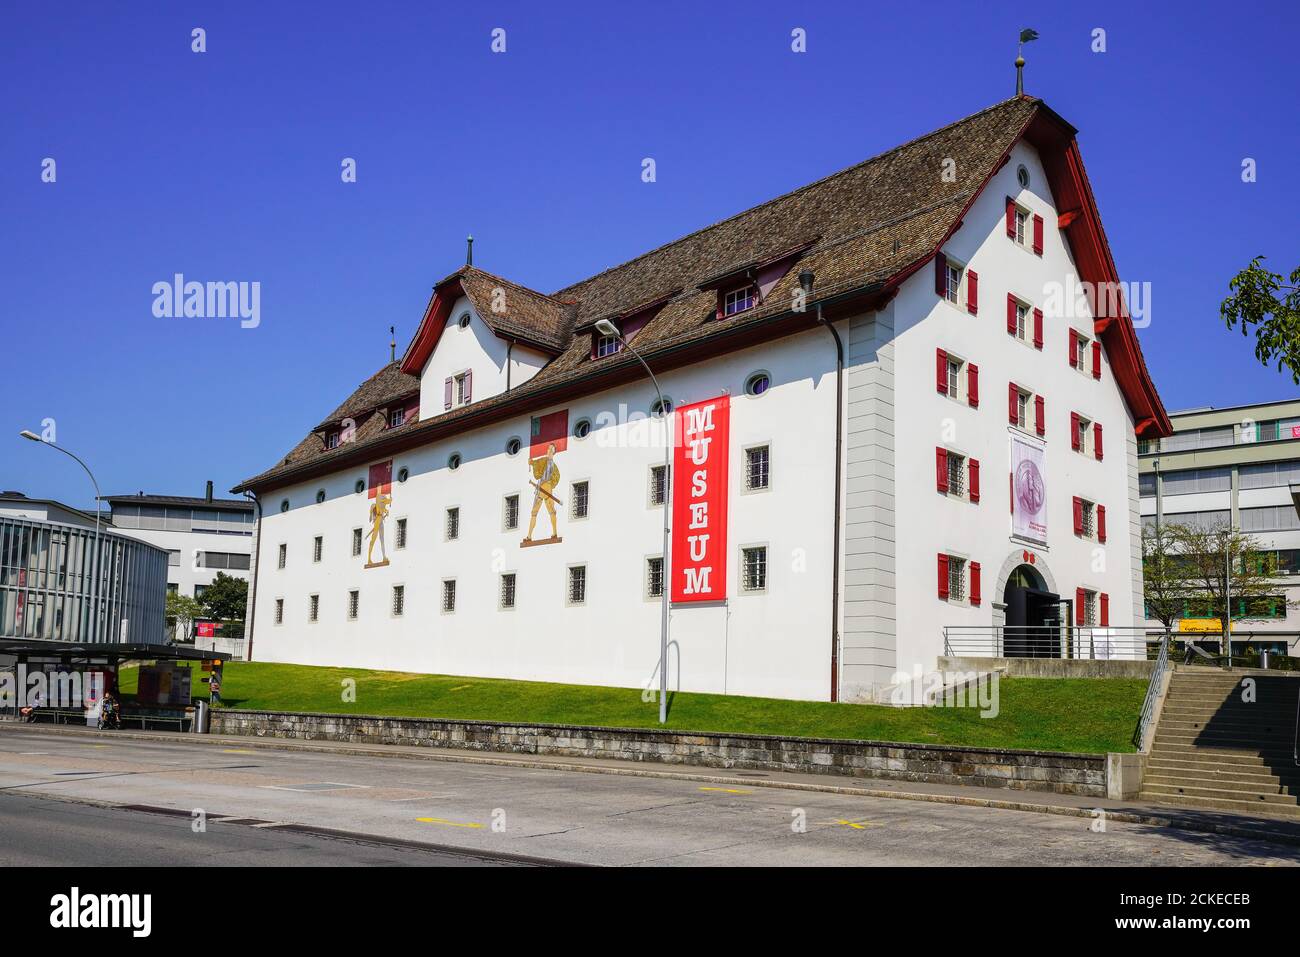 Museum building in Schwyz. Canton  Schwyz in Switzerland. The Federal Charter of 1291 or Bundesbrief, the charter that eventually led to the foundatio Stock Photo